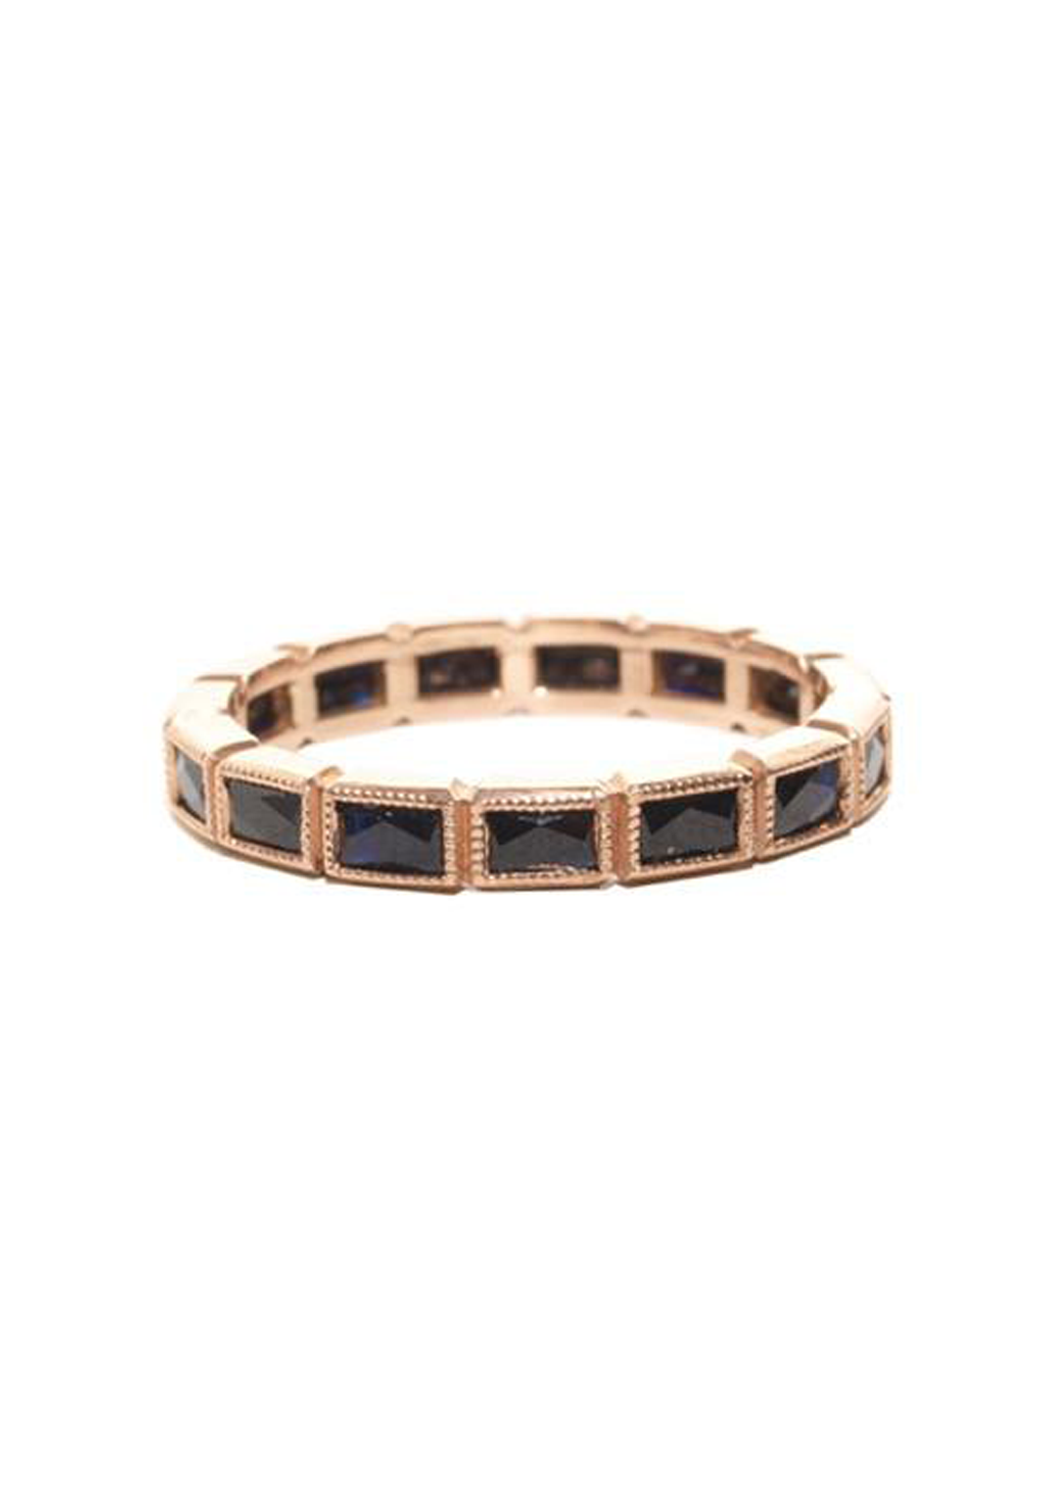 Sylva & Cie 14K Rose Gold French Cut Sapphire Band | OsterJewelers.com